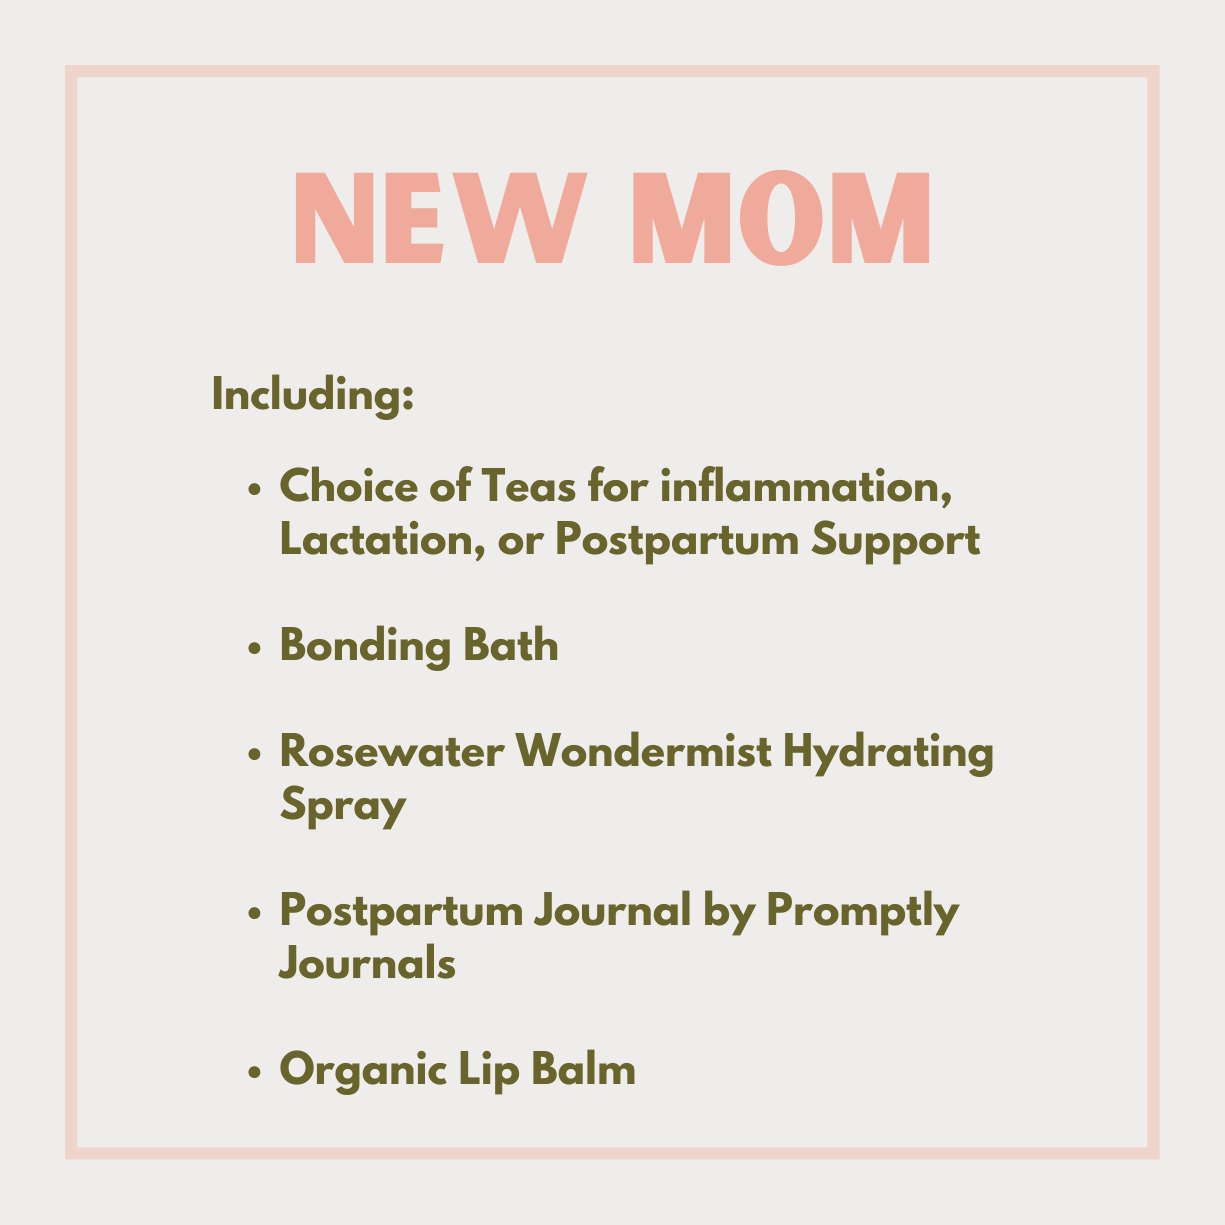 Bundle for a NEW MOM